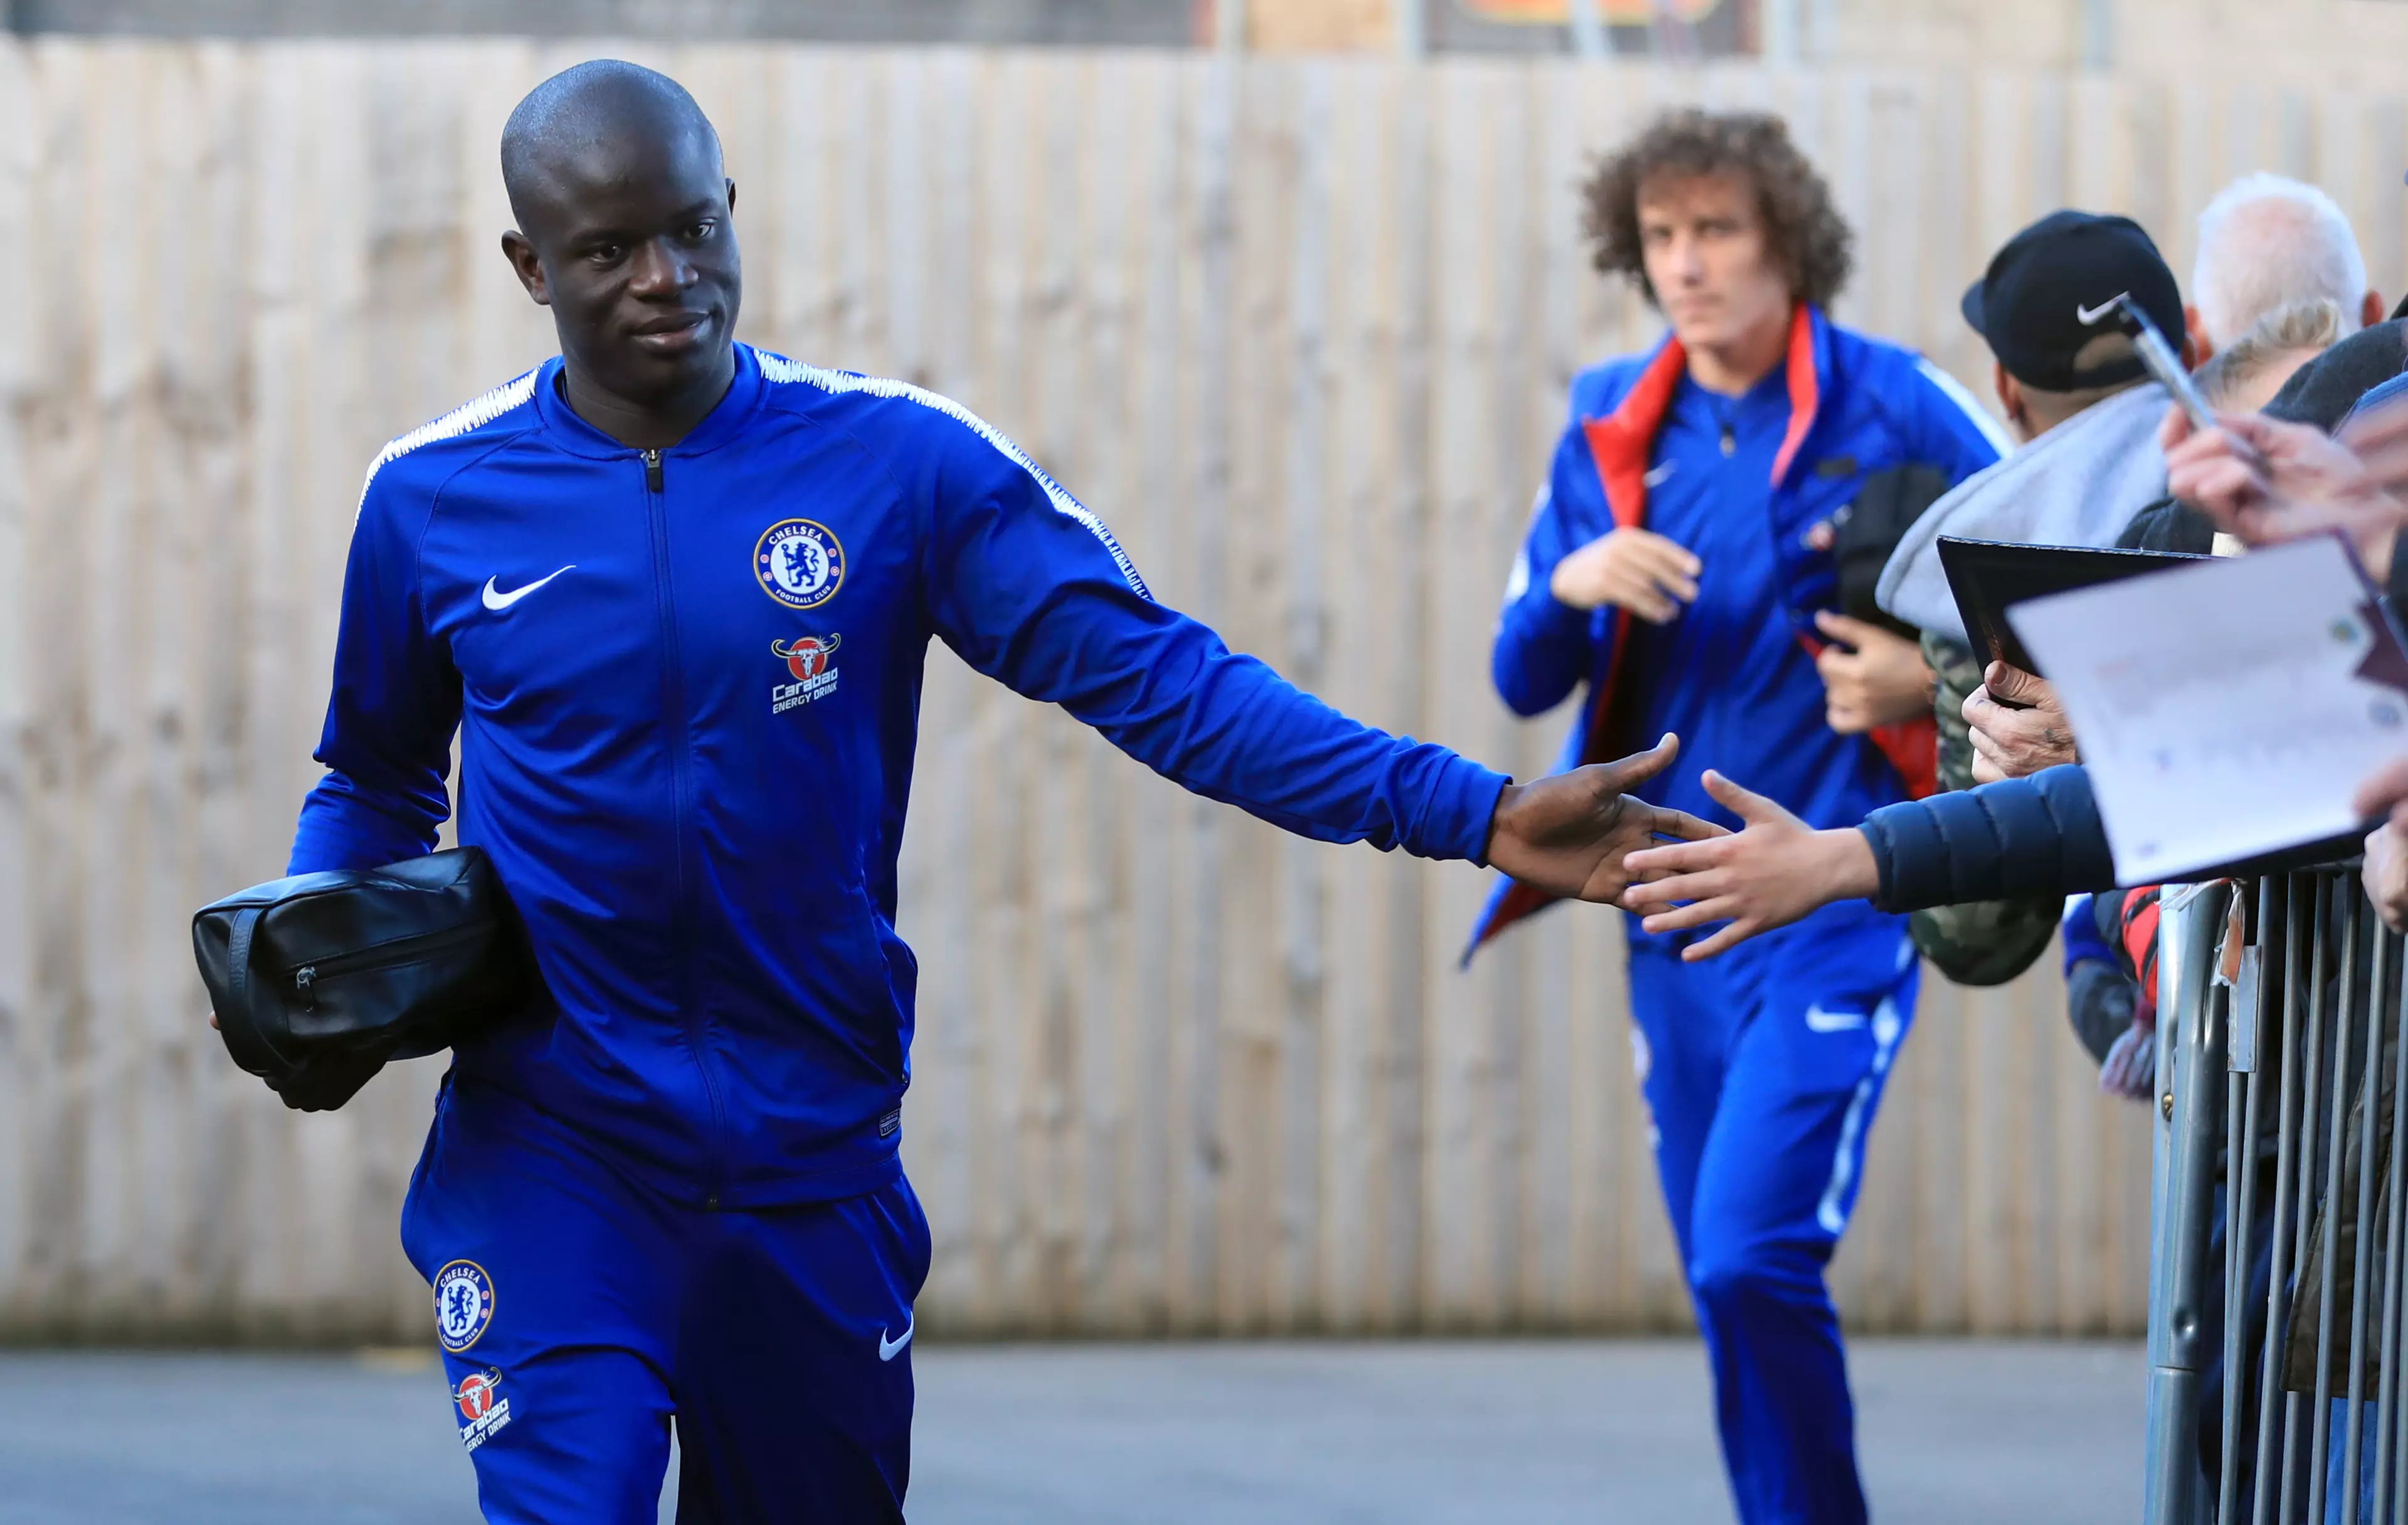 Kante could soon nearly double his current wages. Image: PA Images